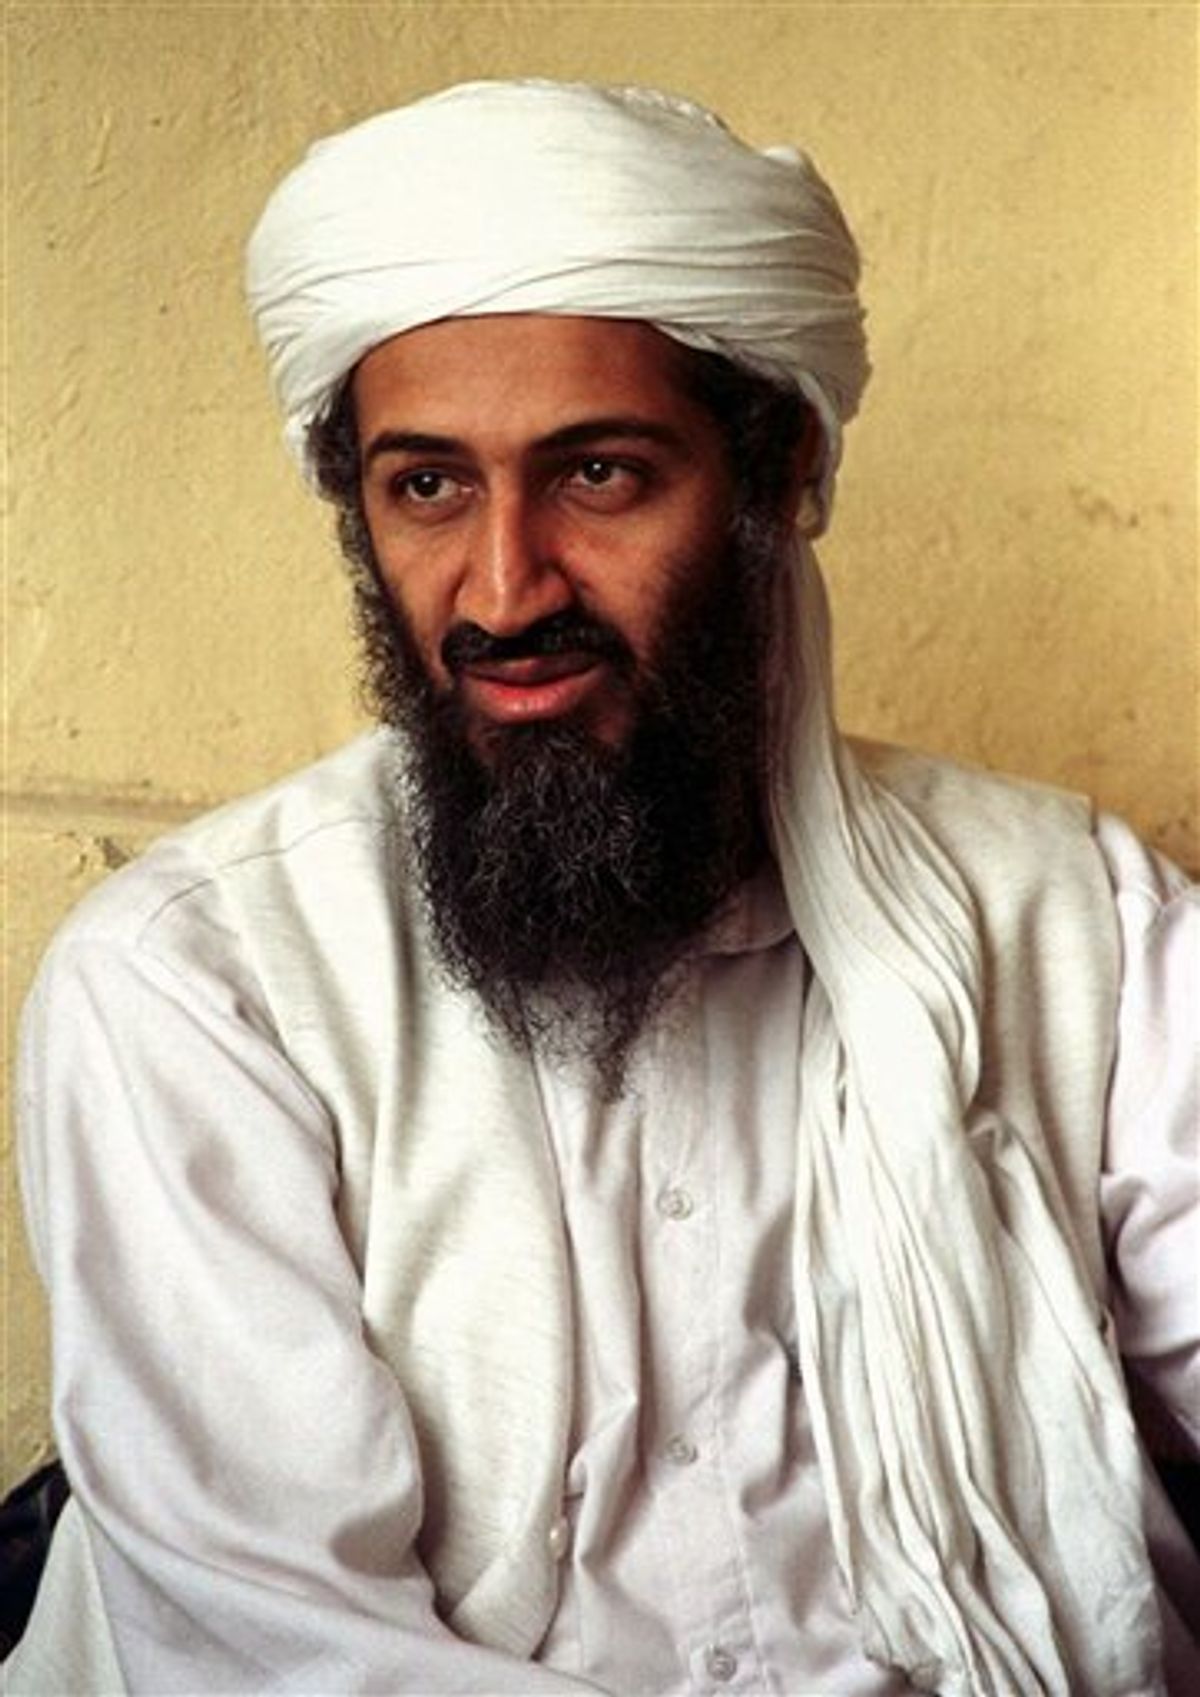 FILE - This April 1998 file photo shows Osama bin Laden in Afghanistan. Federal authorities dropped terrorism charges against bin Laden in court papers filed Friday, June 17, 2011, formally ending a case against the slain al-Qaida leader that began with hopes of seeing him brought to justice in a civilian court. U.S. District Judge Lewis Kaplan approved a request made by federal prosecutors to dismiss the charges  a procedural move that's routine when defendants under indictment die. (AP Photo, File) (AP)